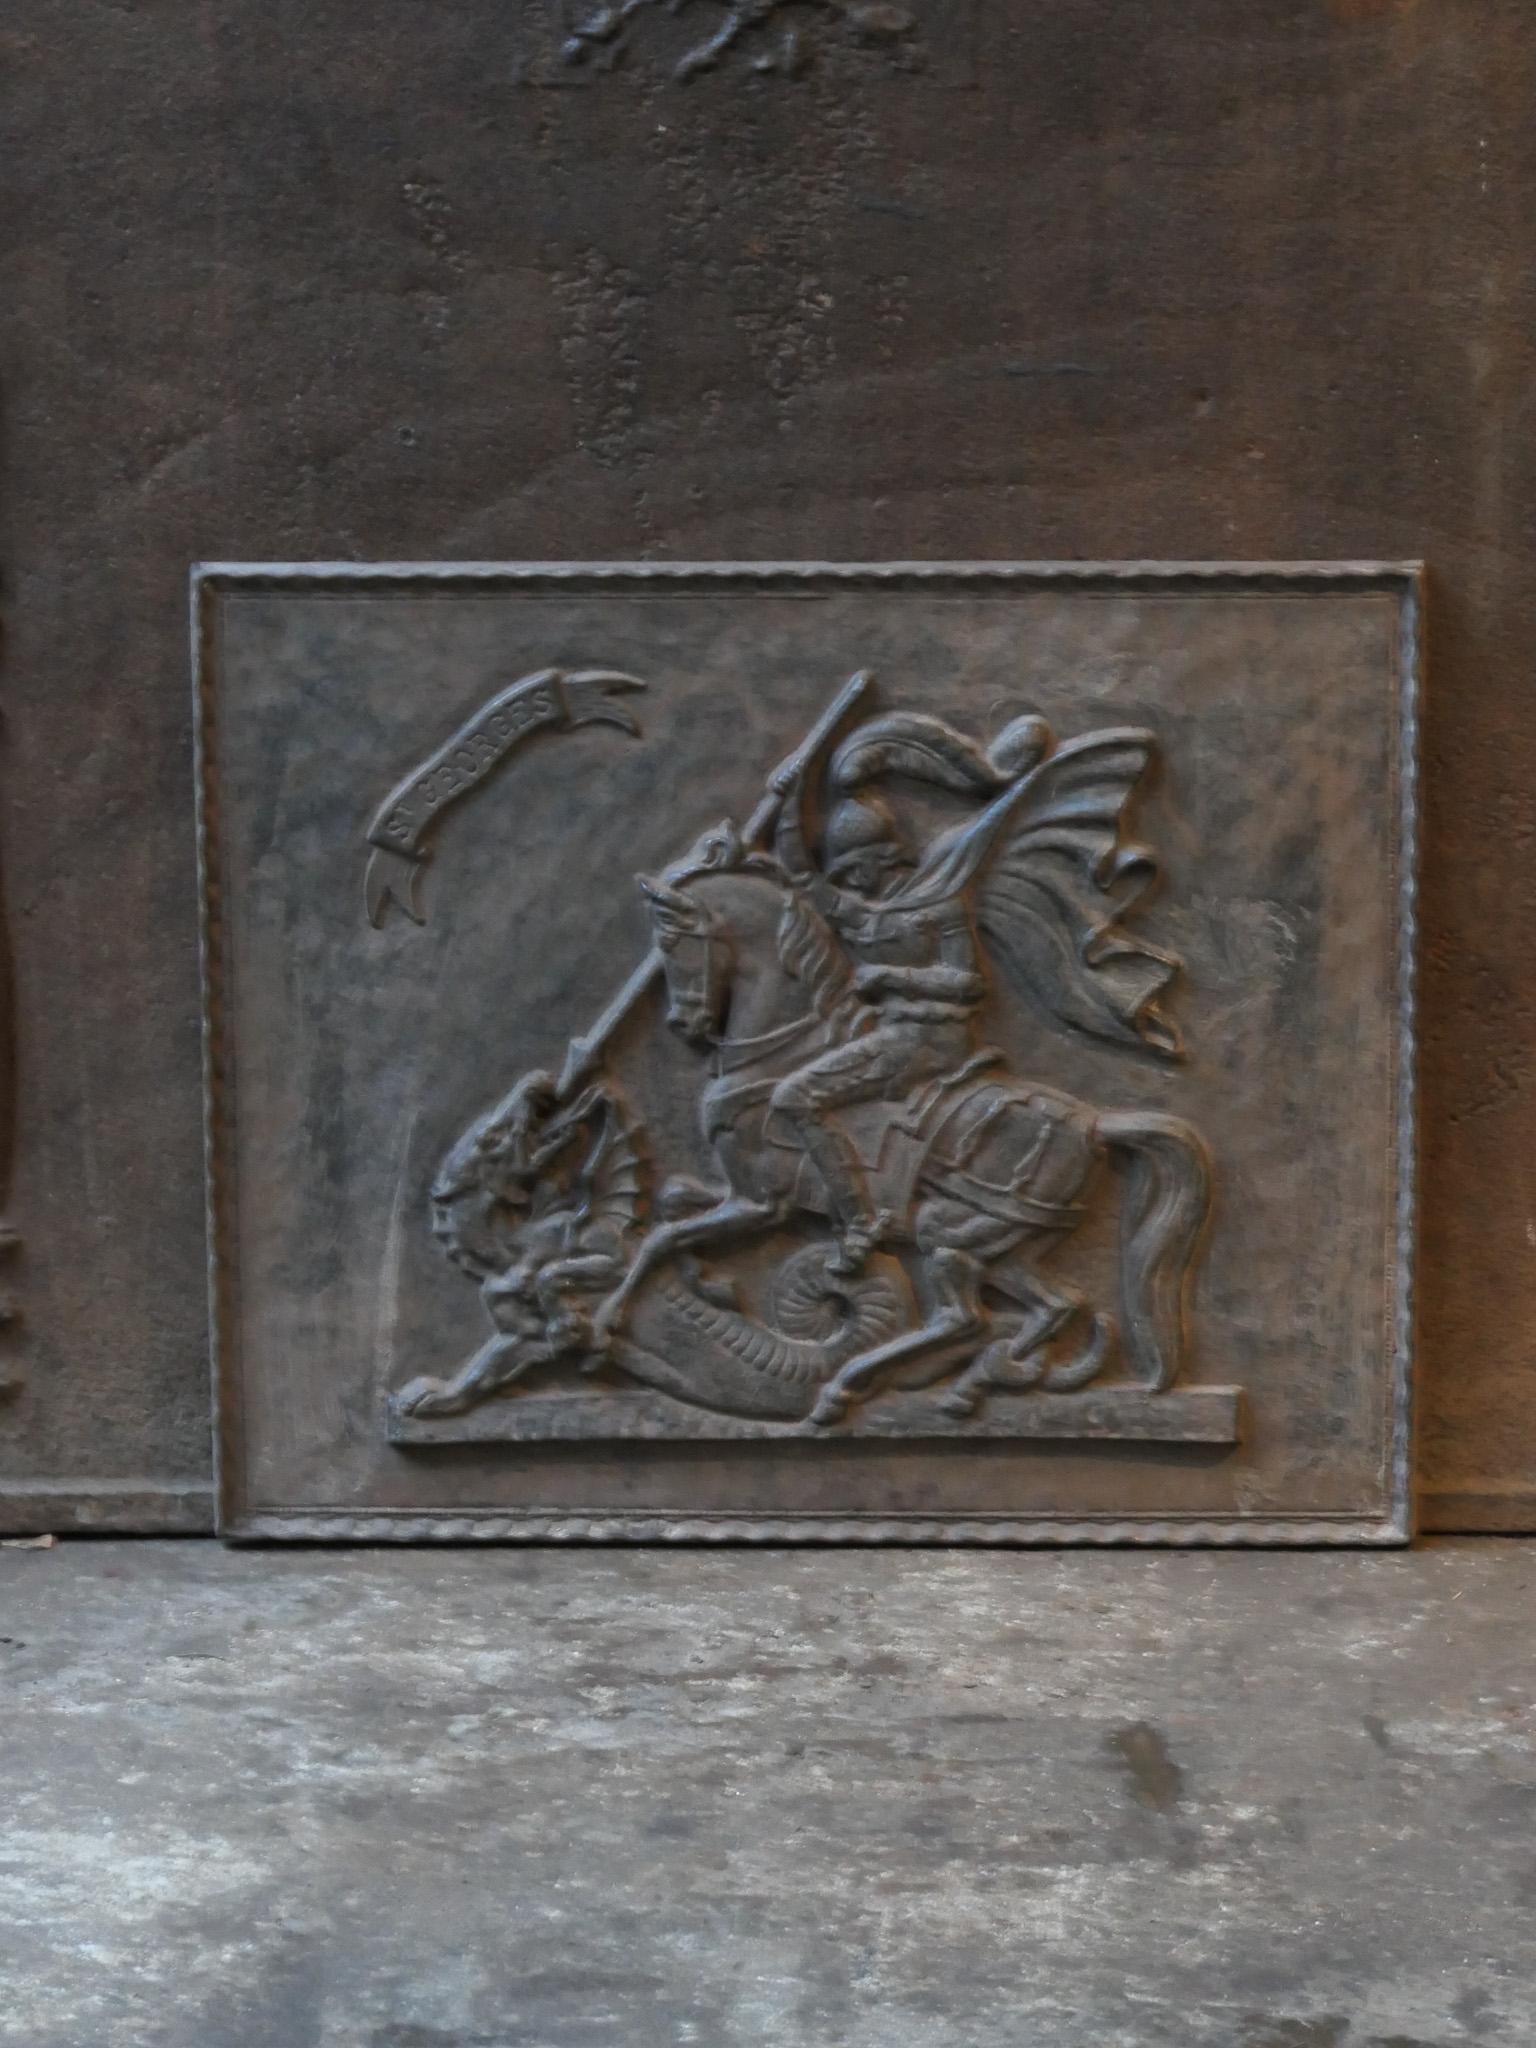 20th Century french fireback with Saint George defeating the dragon. 

The dragon is a symbol of paganism. Defeating the dragon symbolizes the conversion of a pagan country or city to Christianity. Richard Lionheart designated St George as patron of